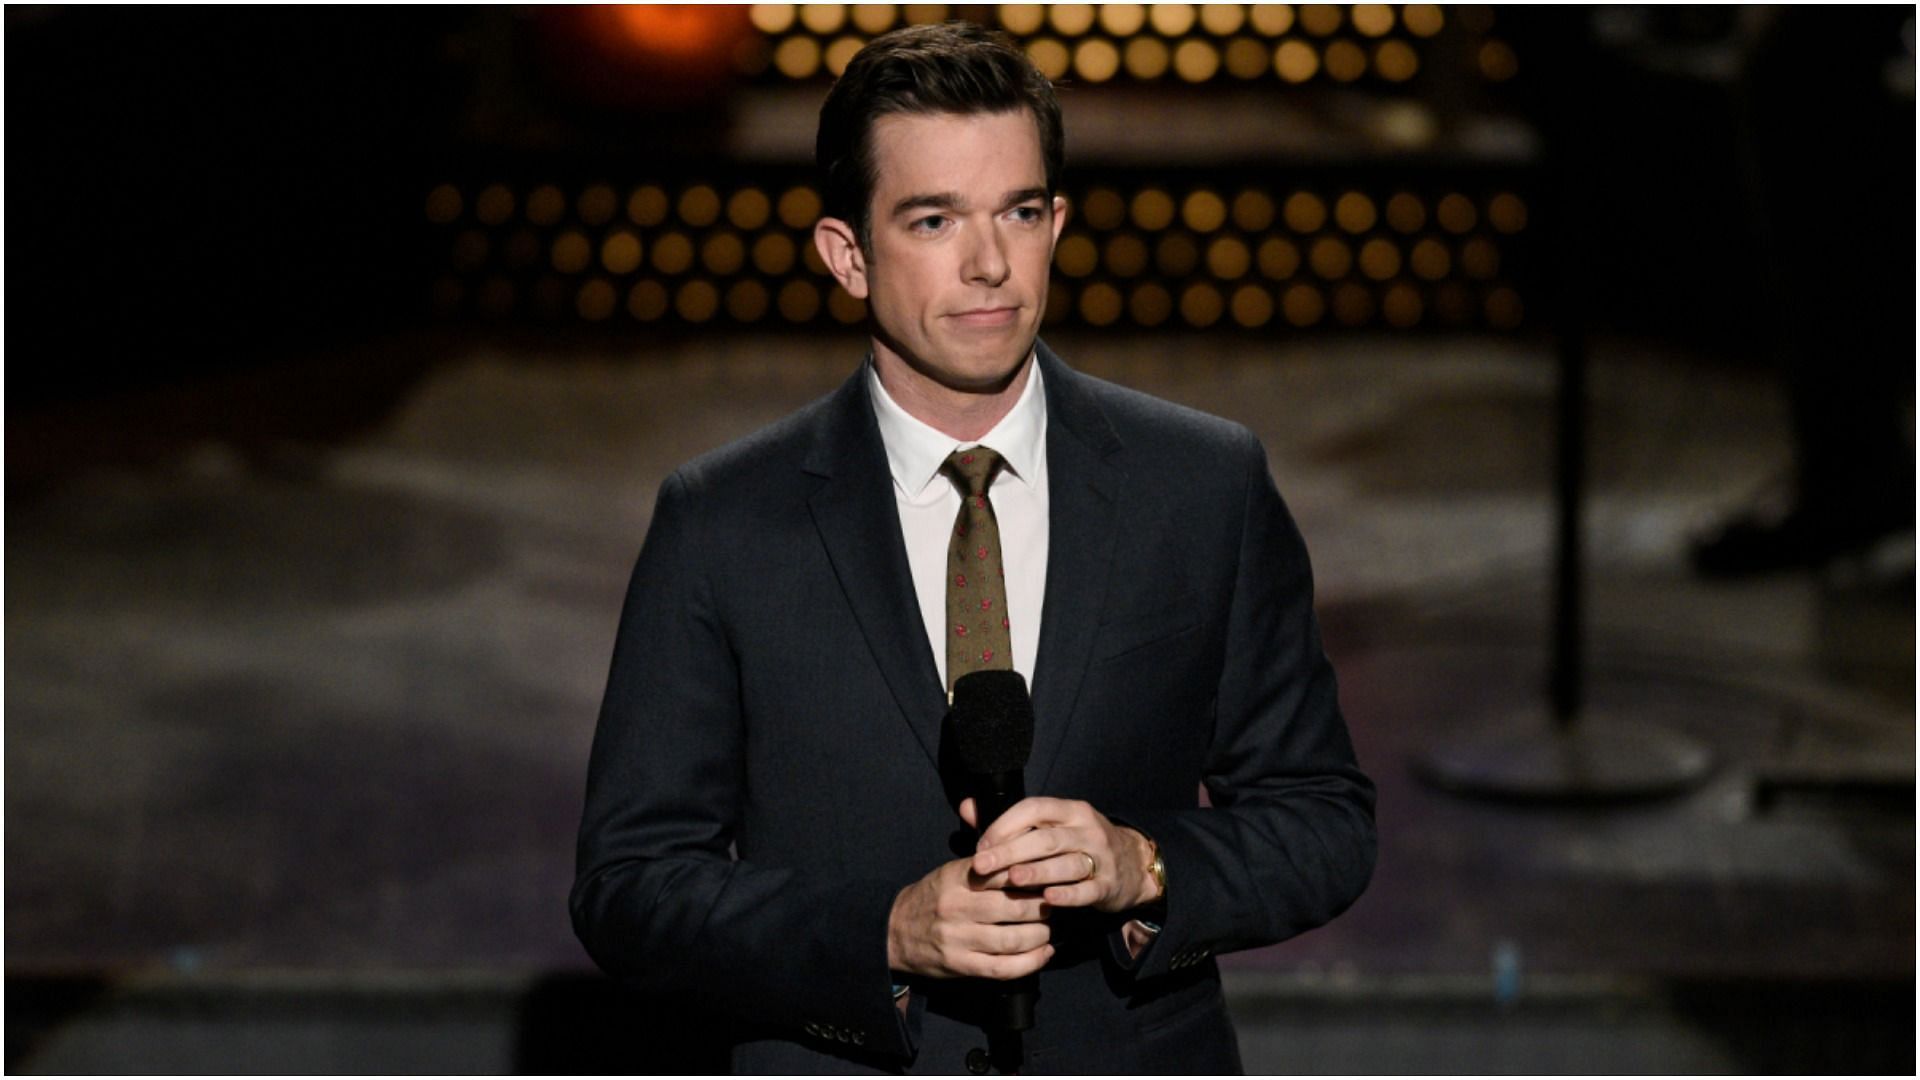 John Mulaney made the official announcement of joining the five-timers club via his Twitter handle (Image via Getty Images/ Kyle Dubiel)